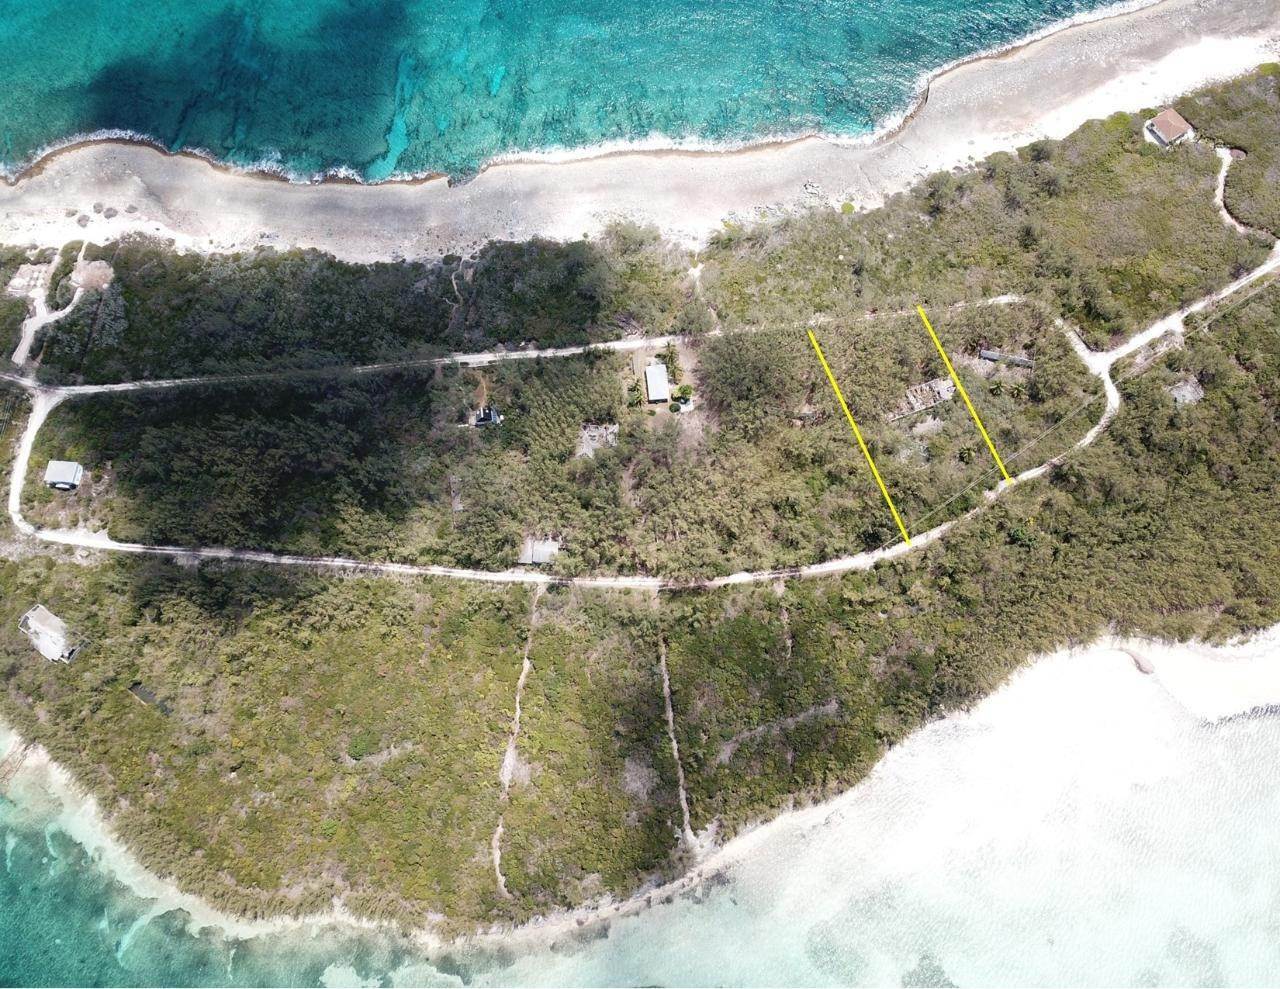 Resort / Hotel for Sale at Whale Point, Eleuthera, Bahamas